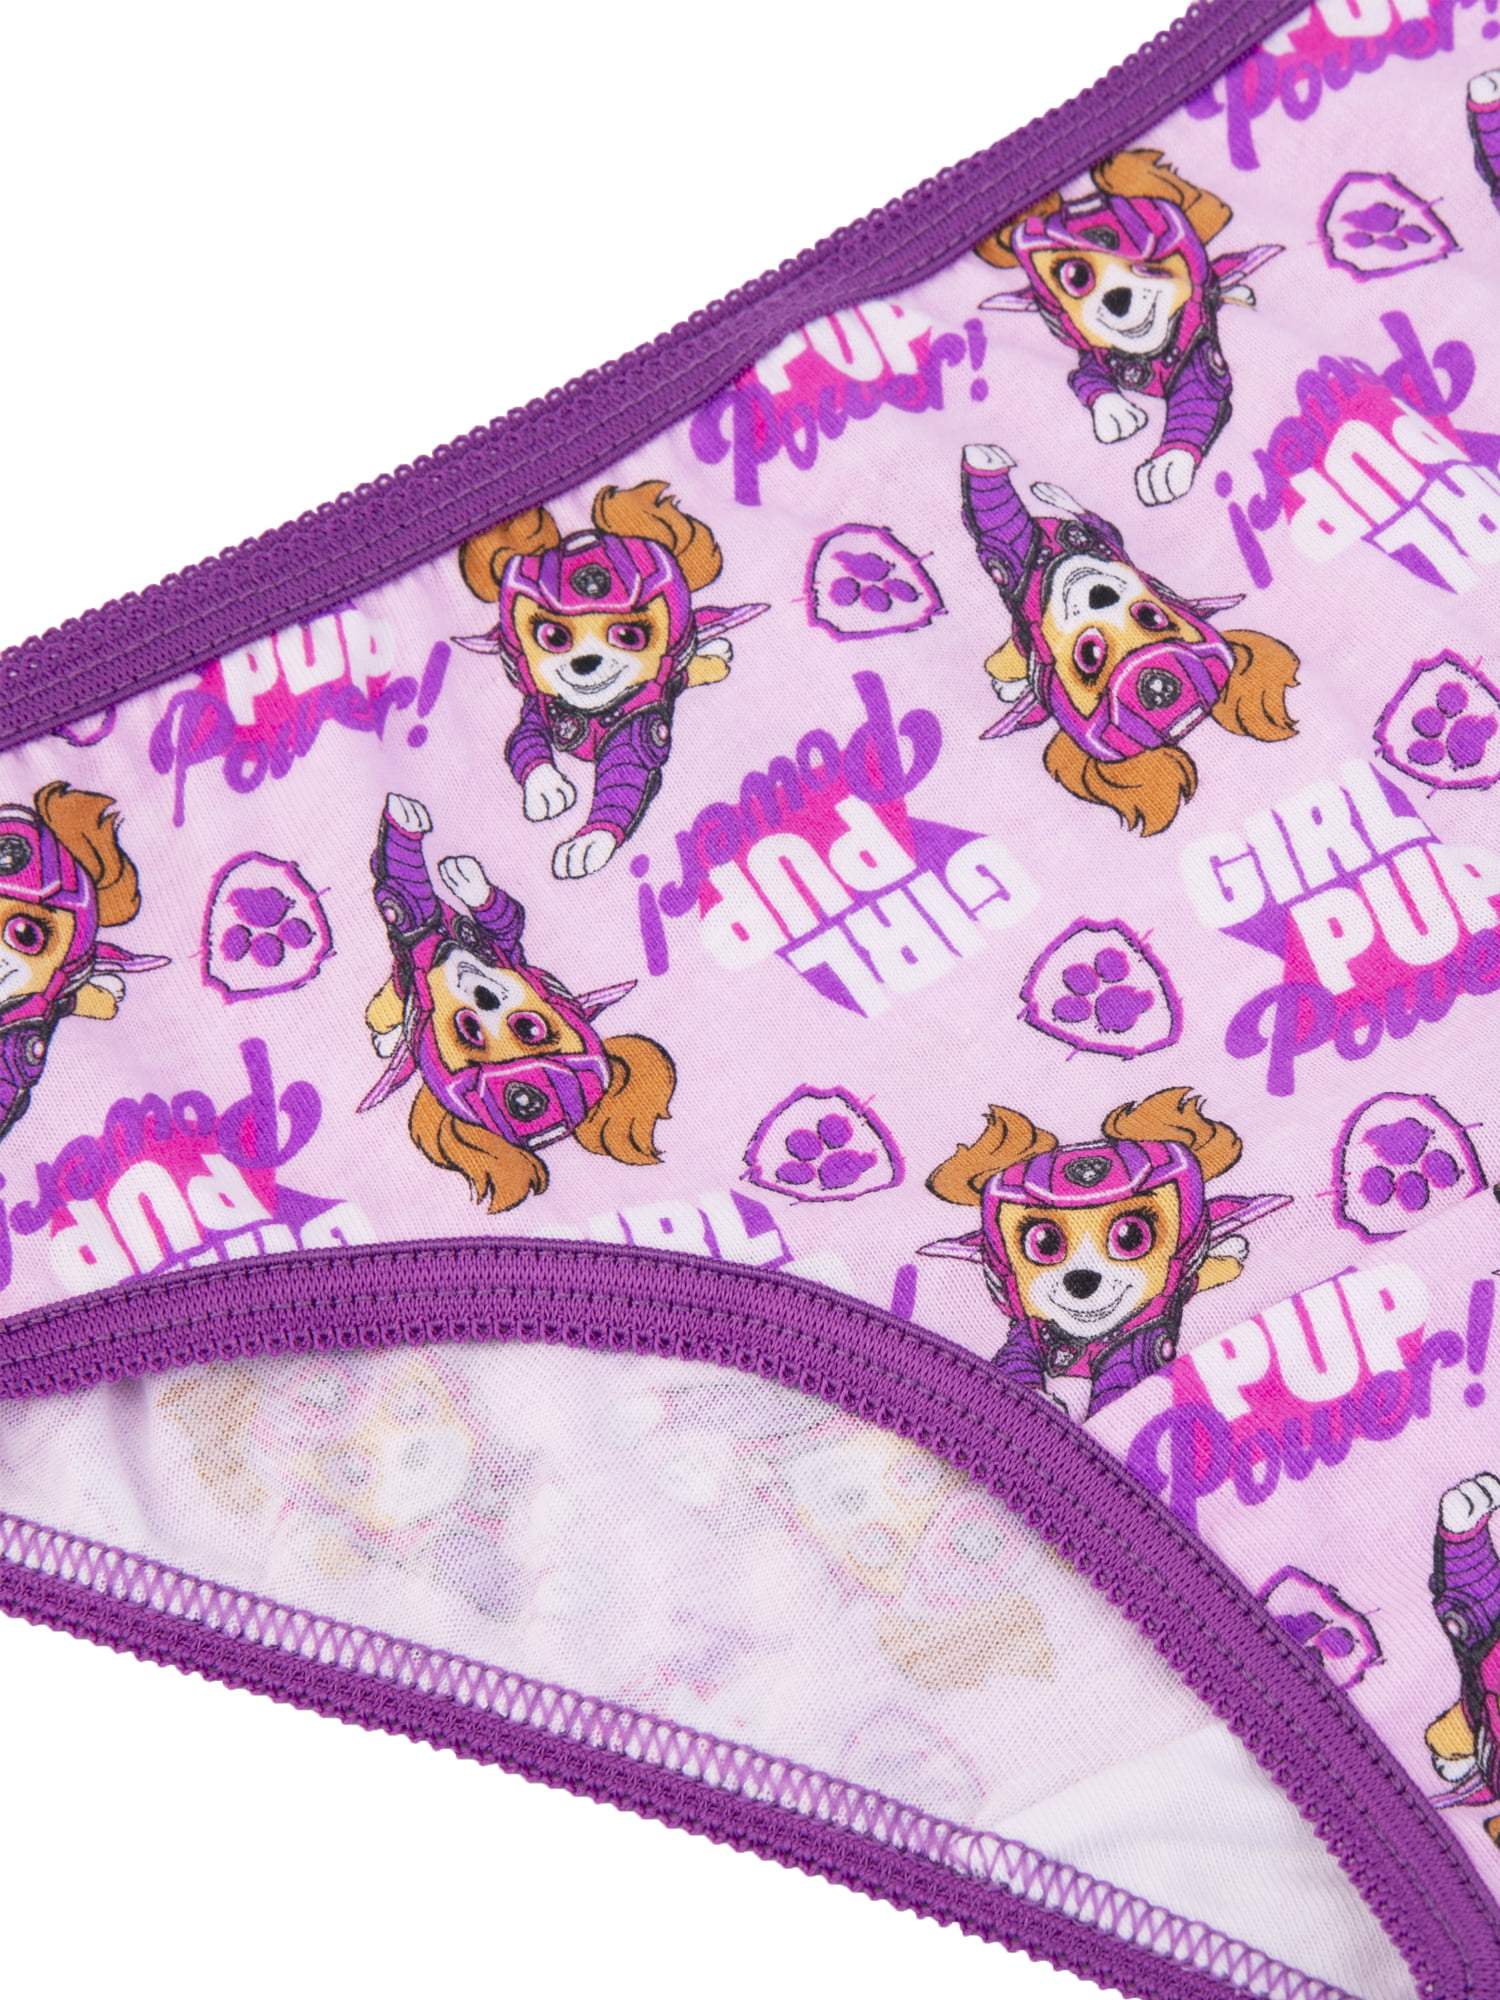 Girls Paw Patrol 7 Pack Character Underwear, Size 4-6 